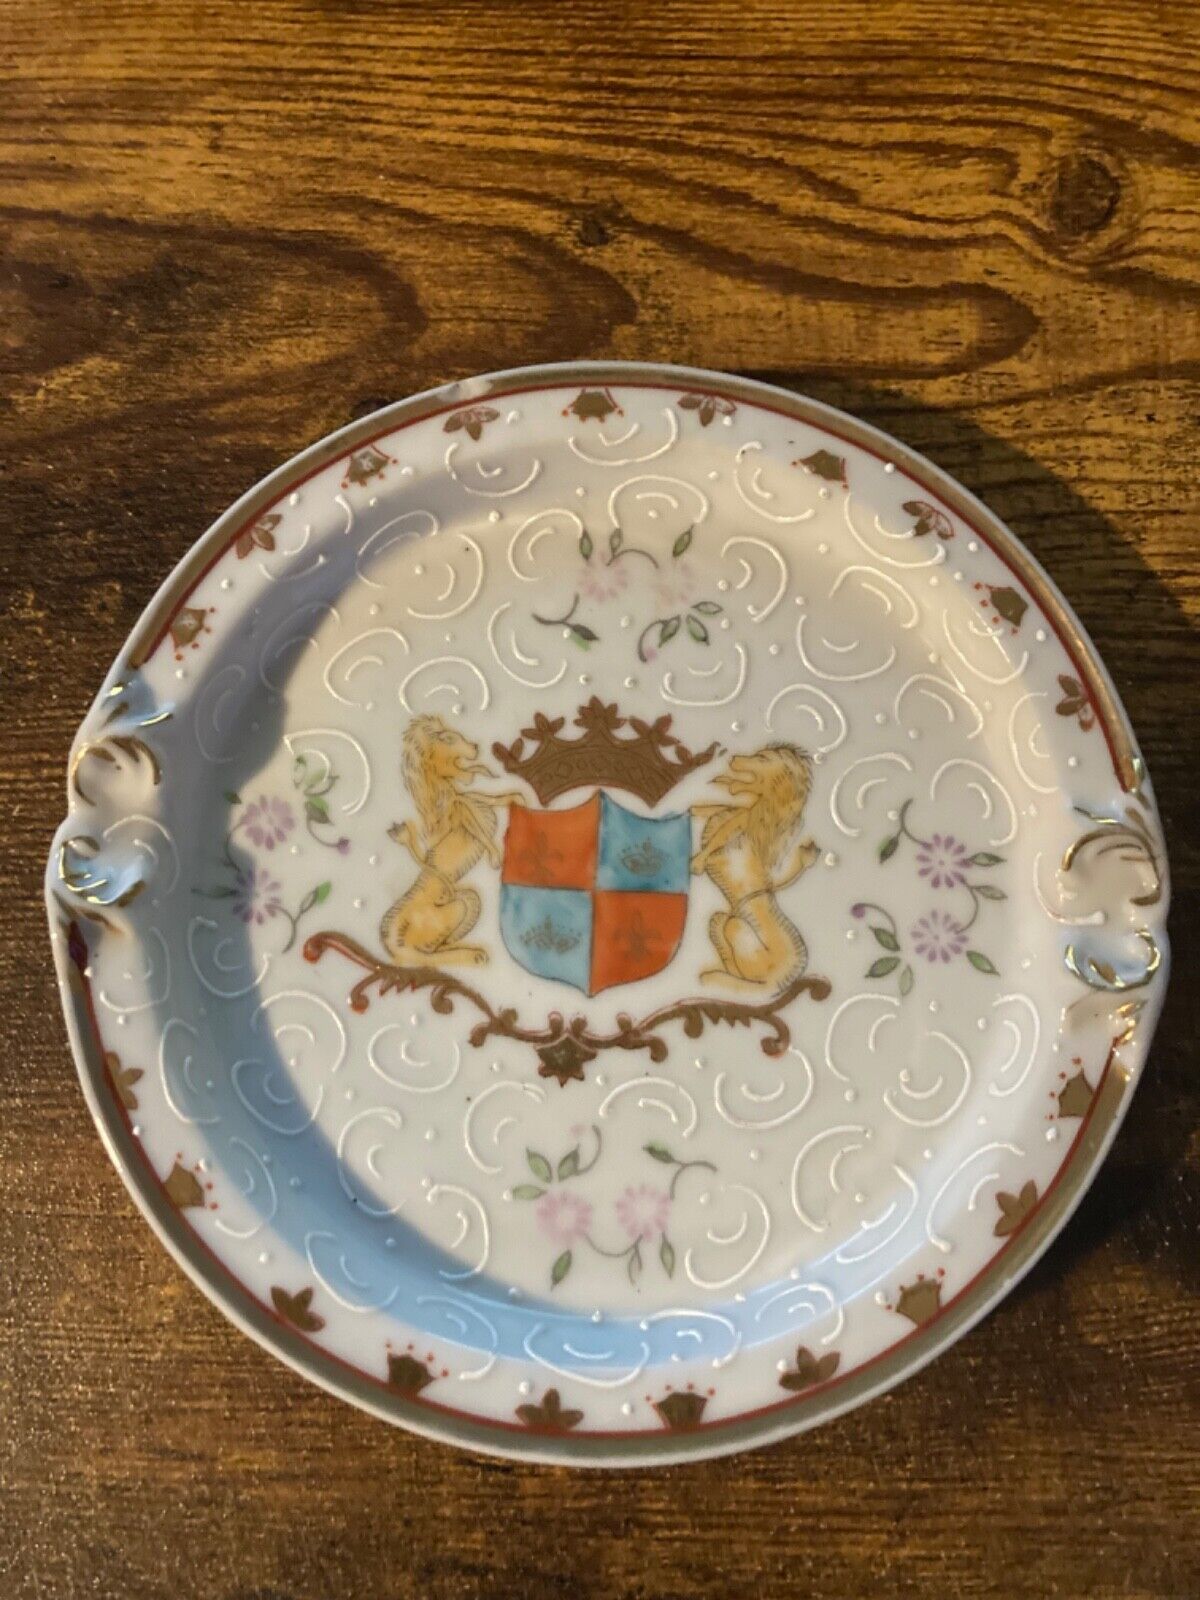 Antique 19th Century Edme Samson French Porcelain armorial Tray - Coat of Arms